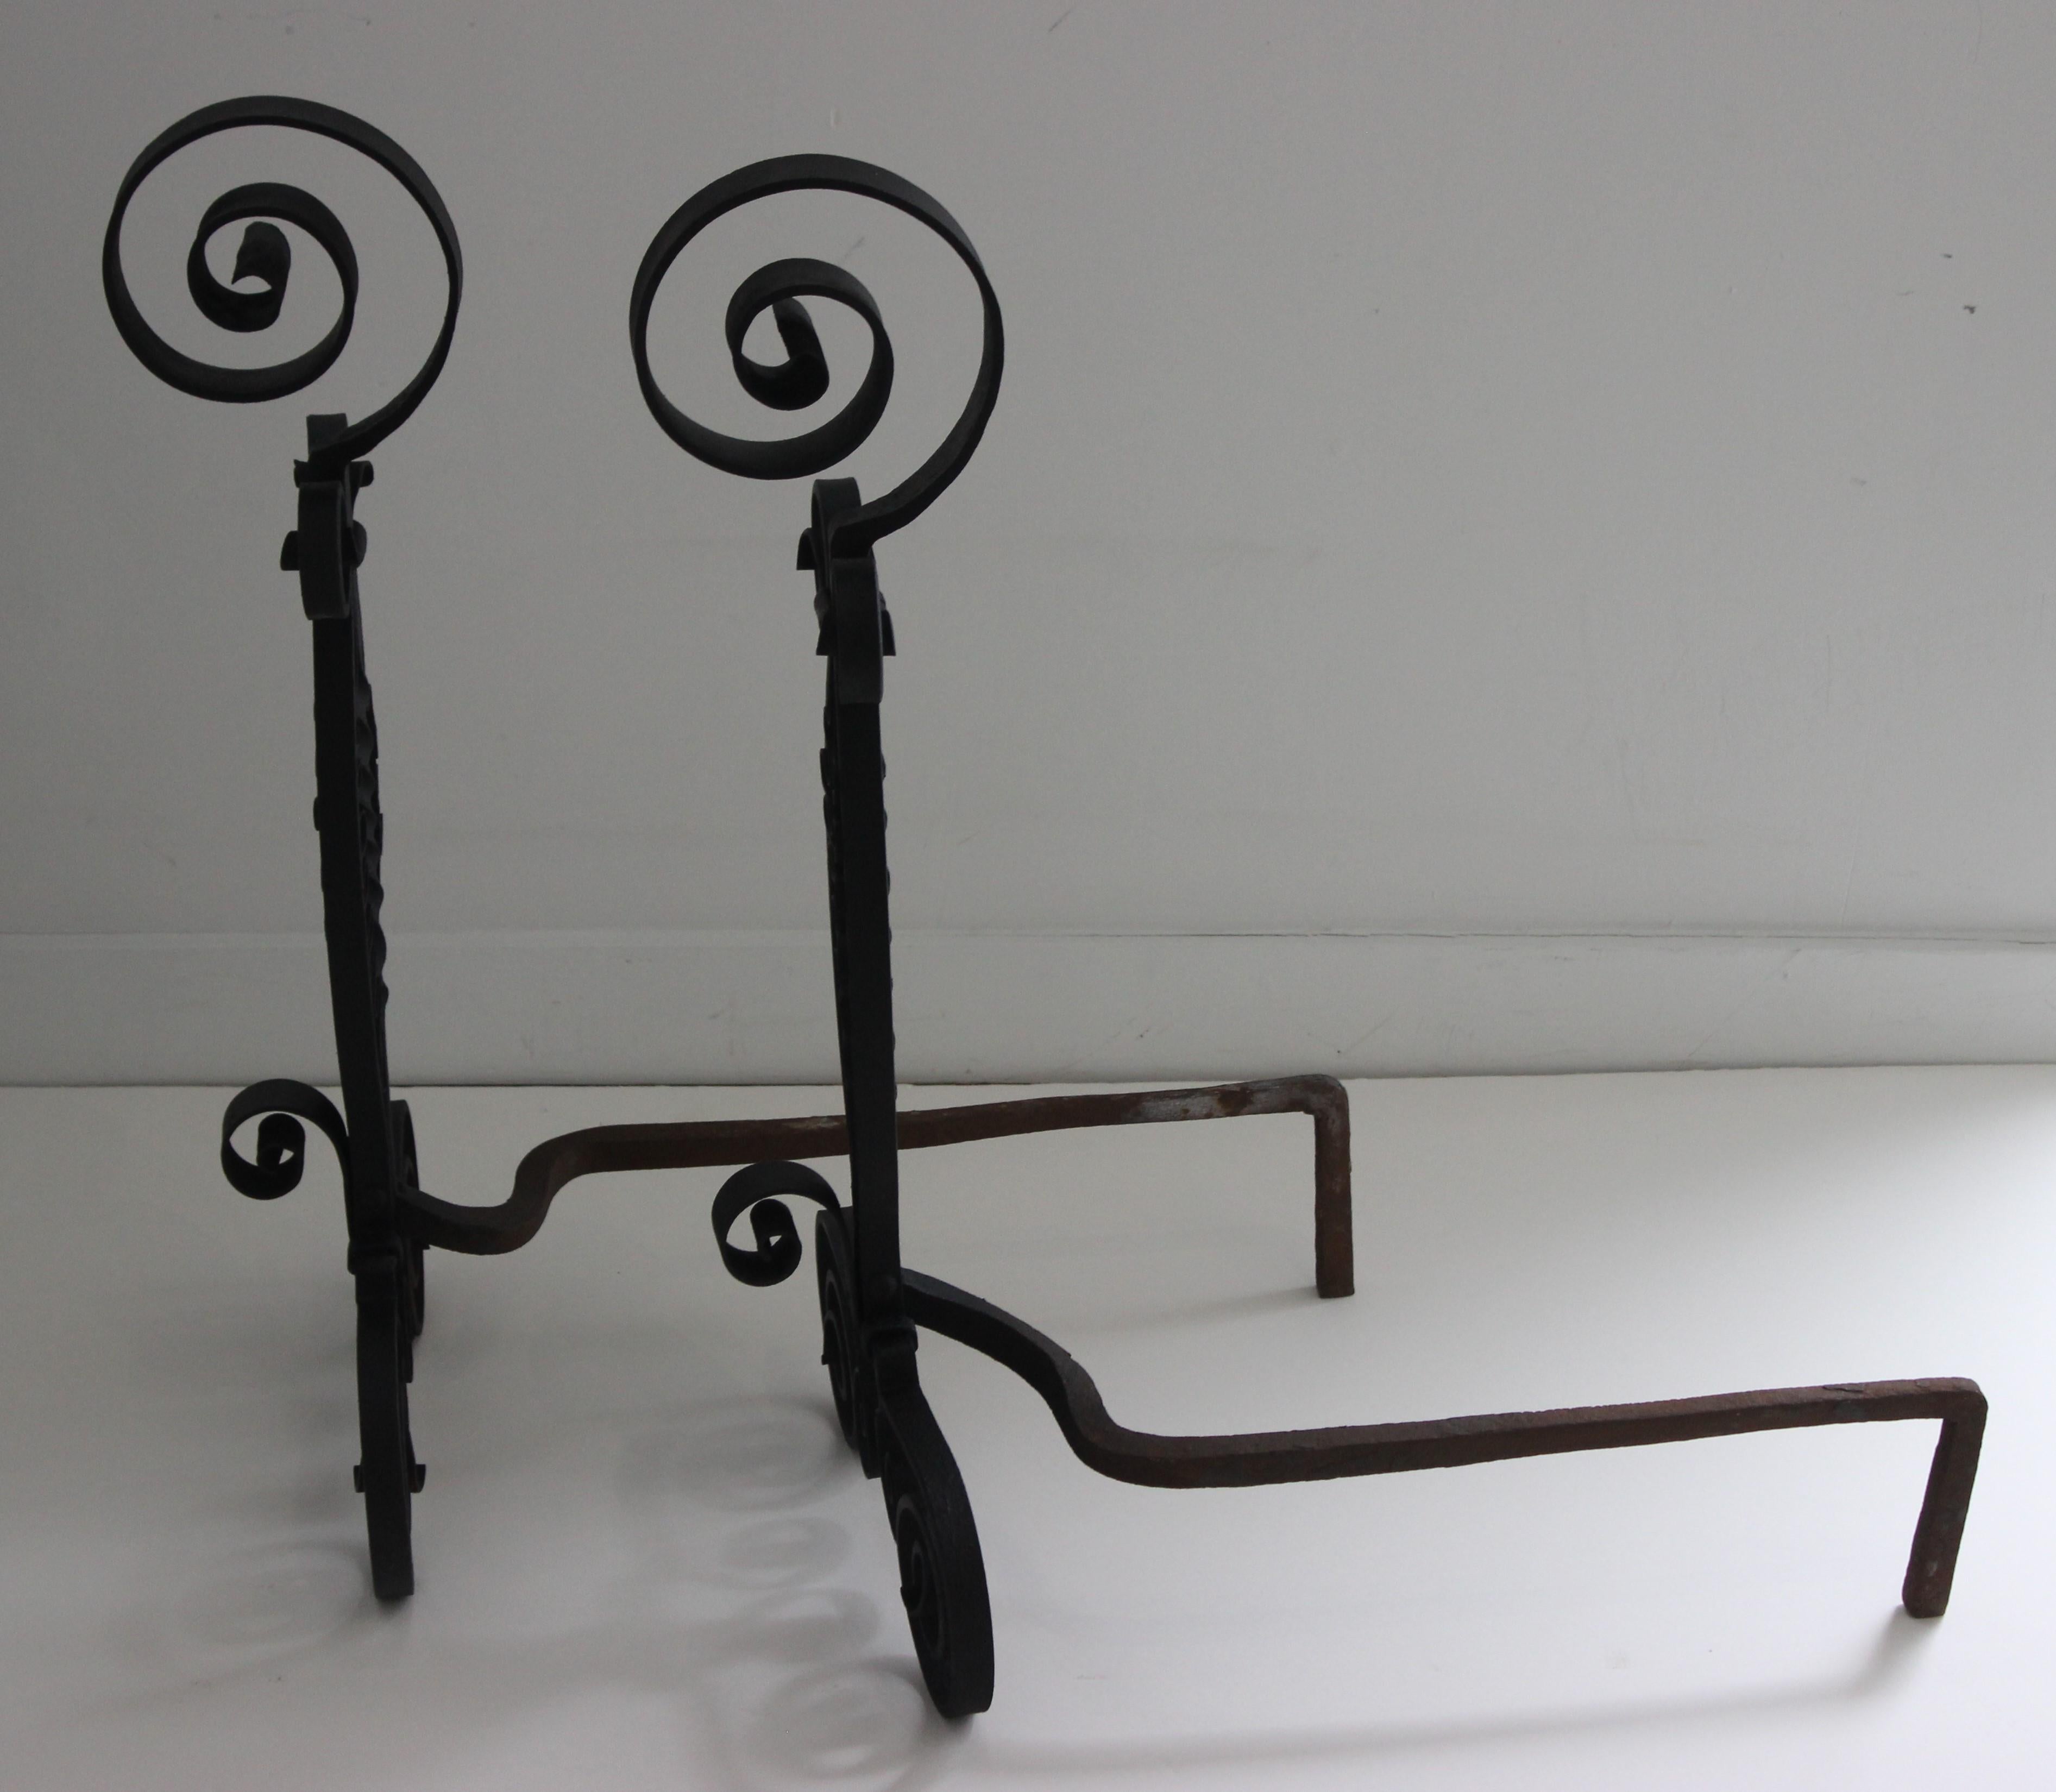 American Set of Spanish Colonial Style Wrought Iron Andirons by Addison Mizner